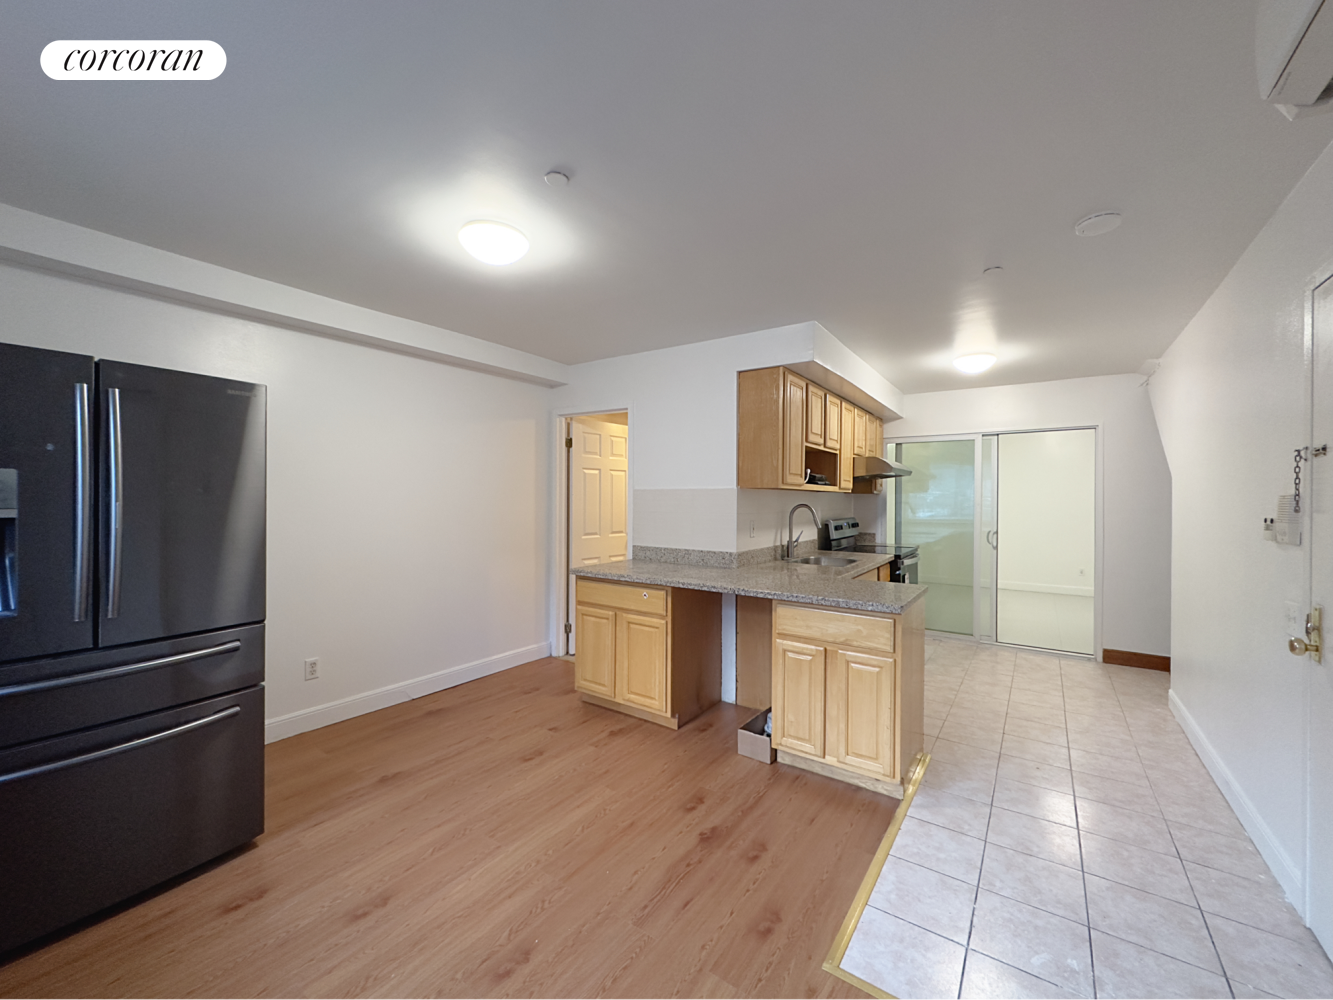 602 39th Street 103A, Sunset Park, Brooklyn, New York - 2 Bedrooms  
2 Bathrooms  
6 Rooms - 